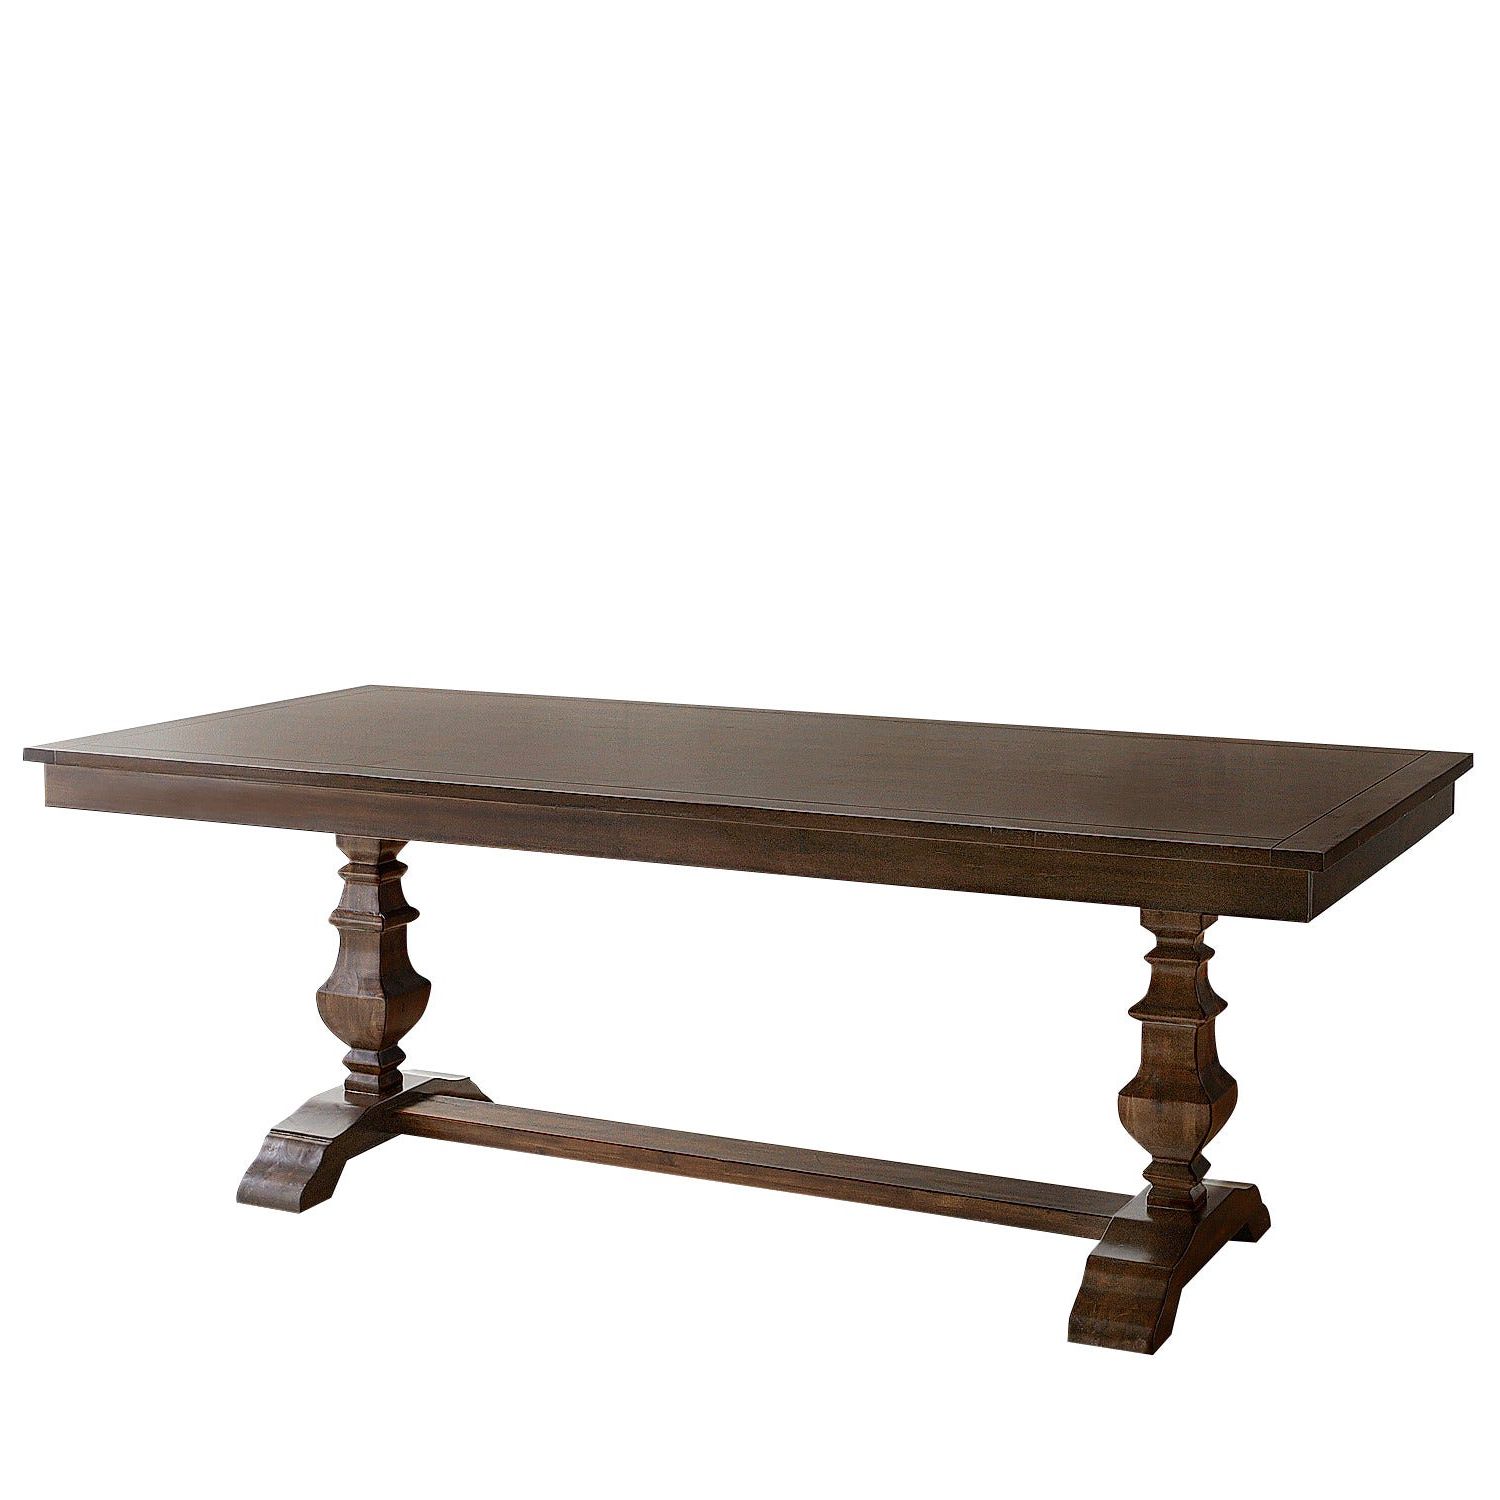 Transitional Antique Walnut Drop Leaf Casual Dining Tables Throughout Well Known Bradding Espresso Dining Table ~ Dining Tables (View 13 of 25)